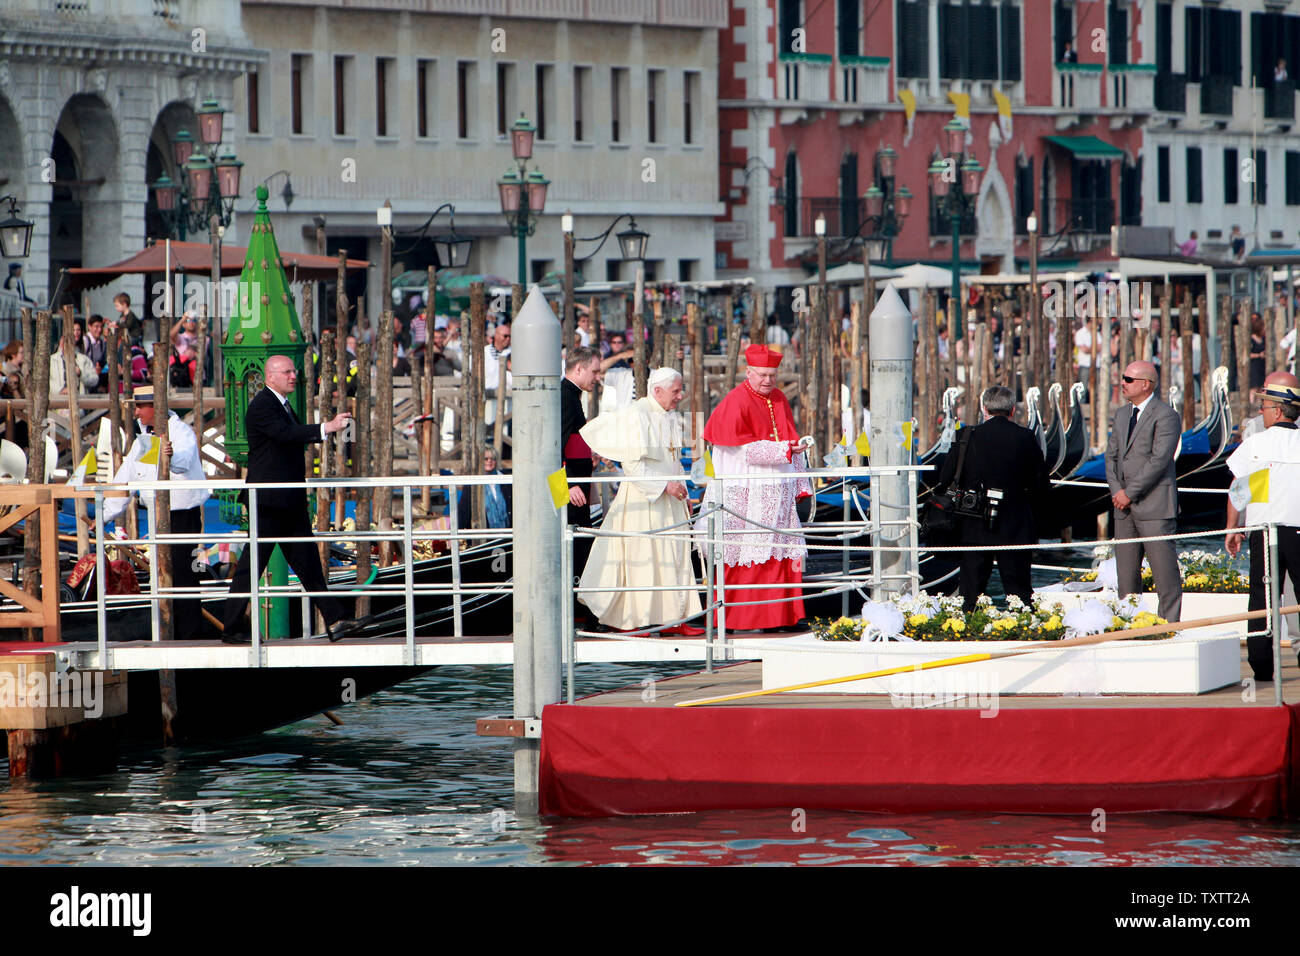 Pope Benedict XVI sits in a gondola in the Grand Canal during his pastoral visit to Aquilea and Venice, Italy on May 8, 2011. Pope Benedict XVI is in Venice for a weekend vist that will highlight the Christian heritage of this crossroads of Mediterranean and Eastern European history.  UPI/Stefano Spaziani Stock Photo